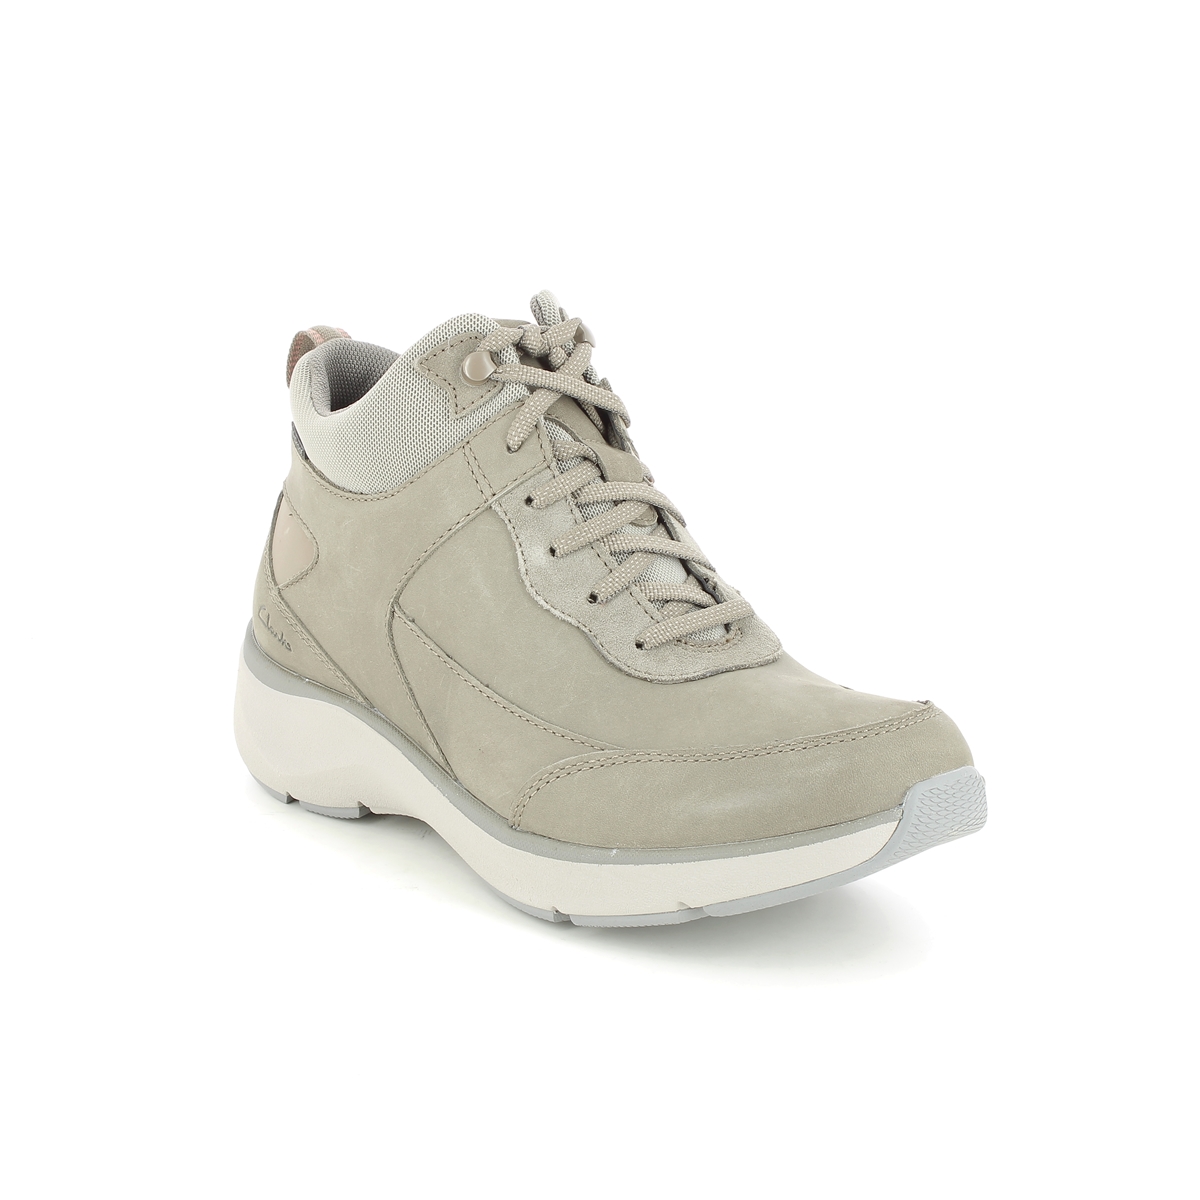 Clarks Wave 2 Mid Tex Taupe Nubuck Womens Walking Boots 536585E In Size 7 In Plain Taupe Nubuck E Width Fitting Narrow Fit